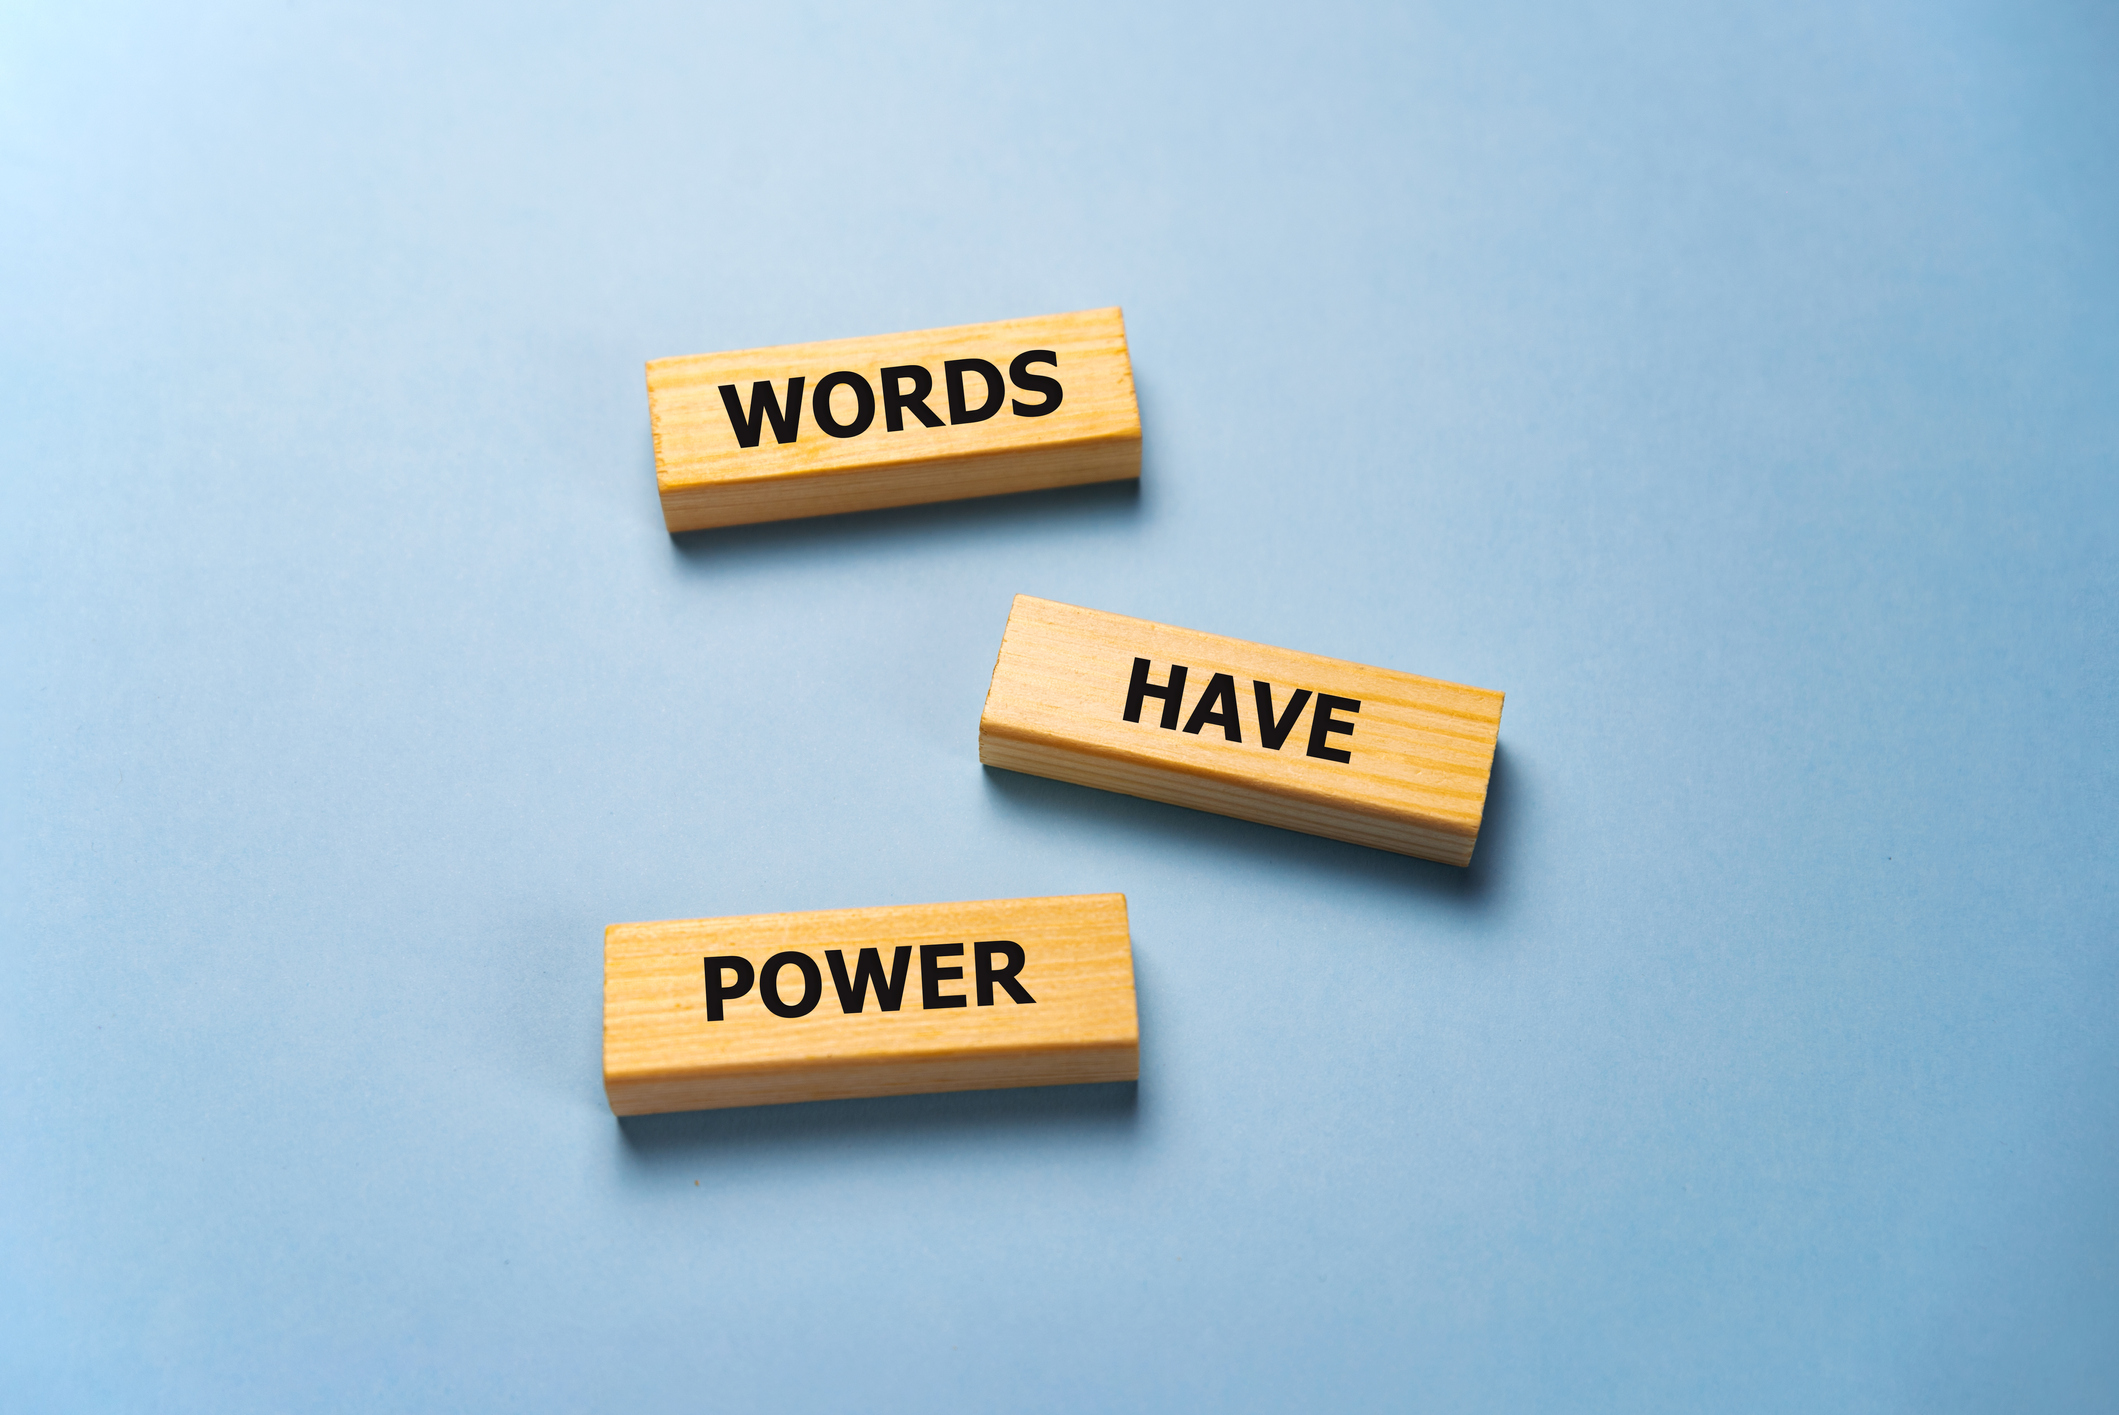 Words 'words have power' on wooden blocks